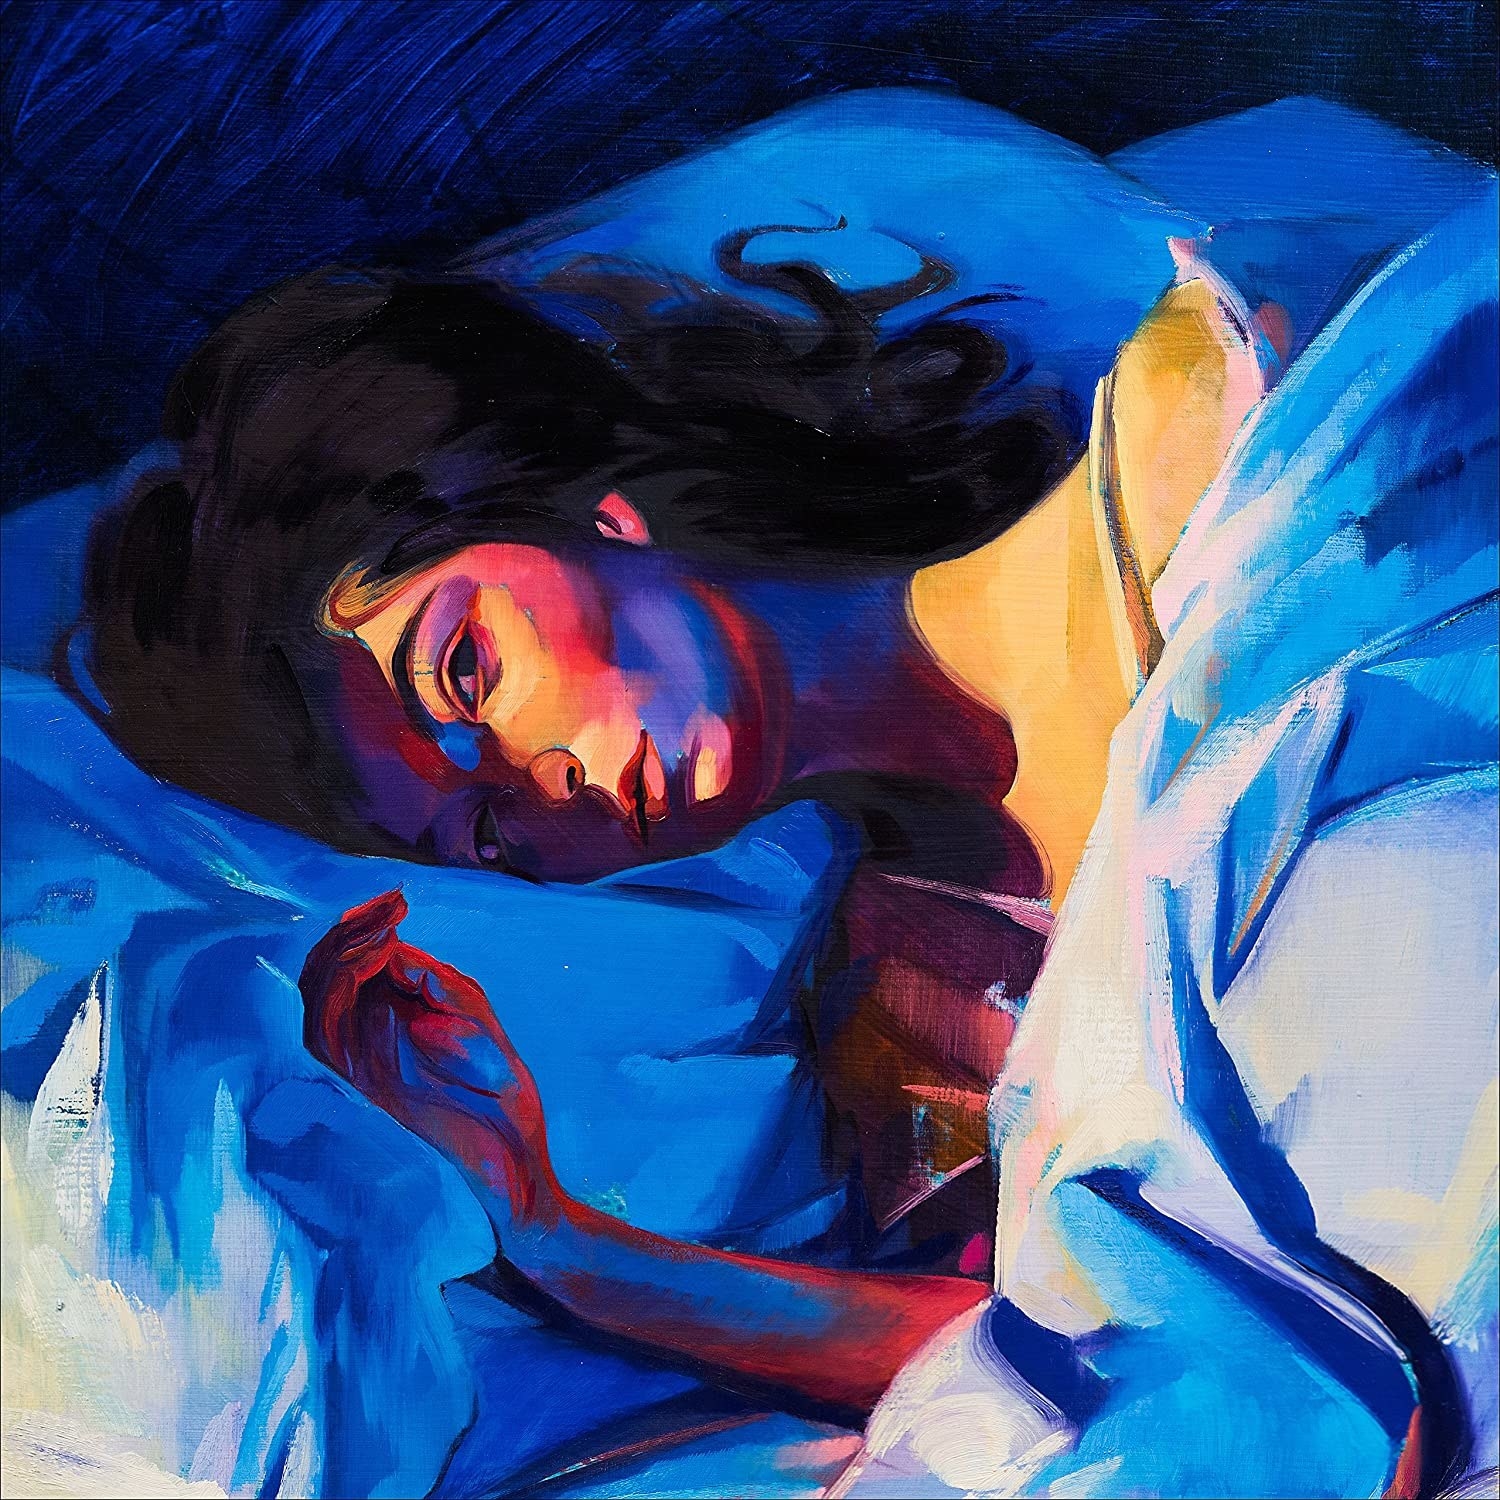 A painting of Lorde in bed. 